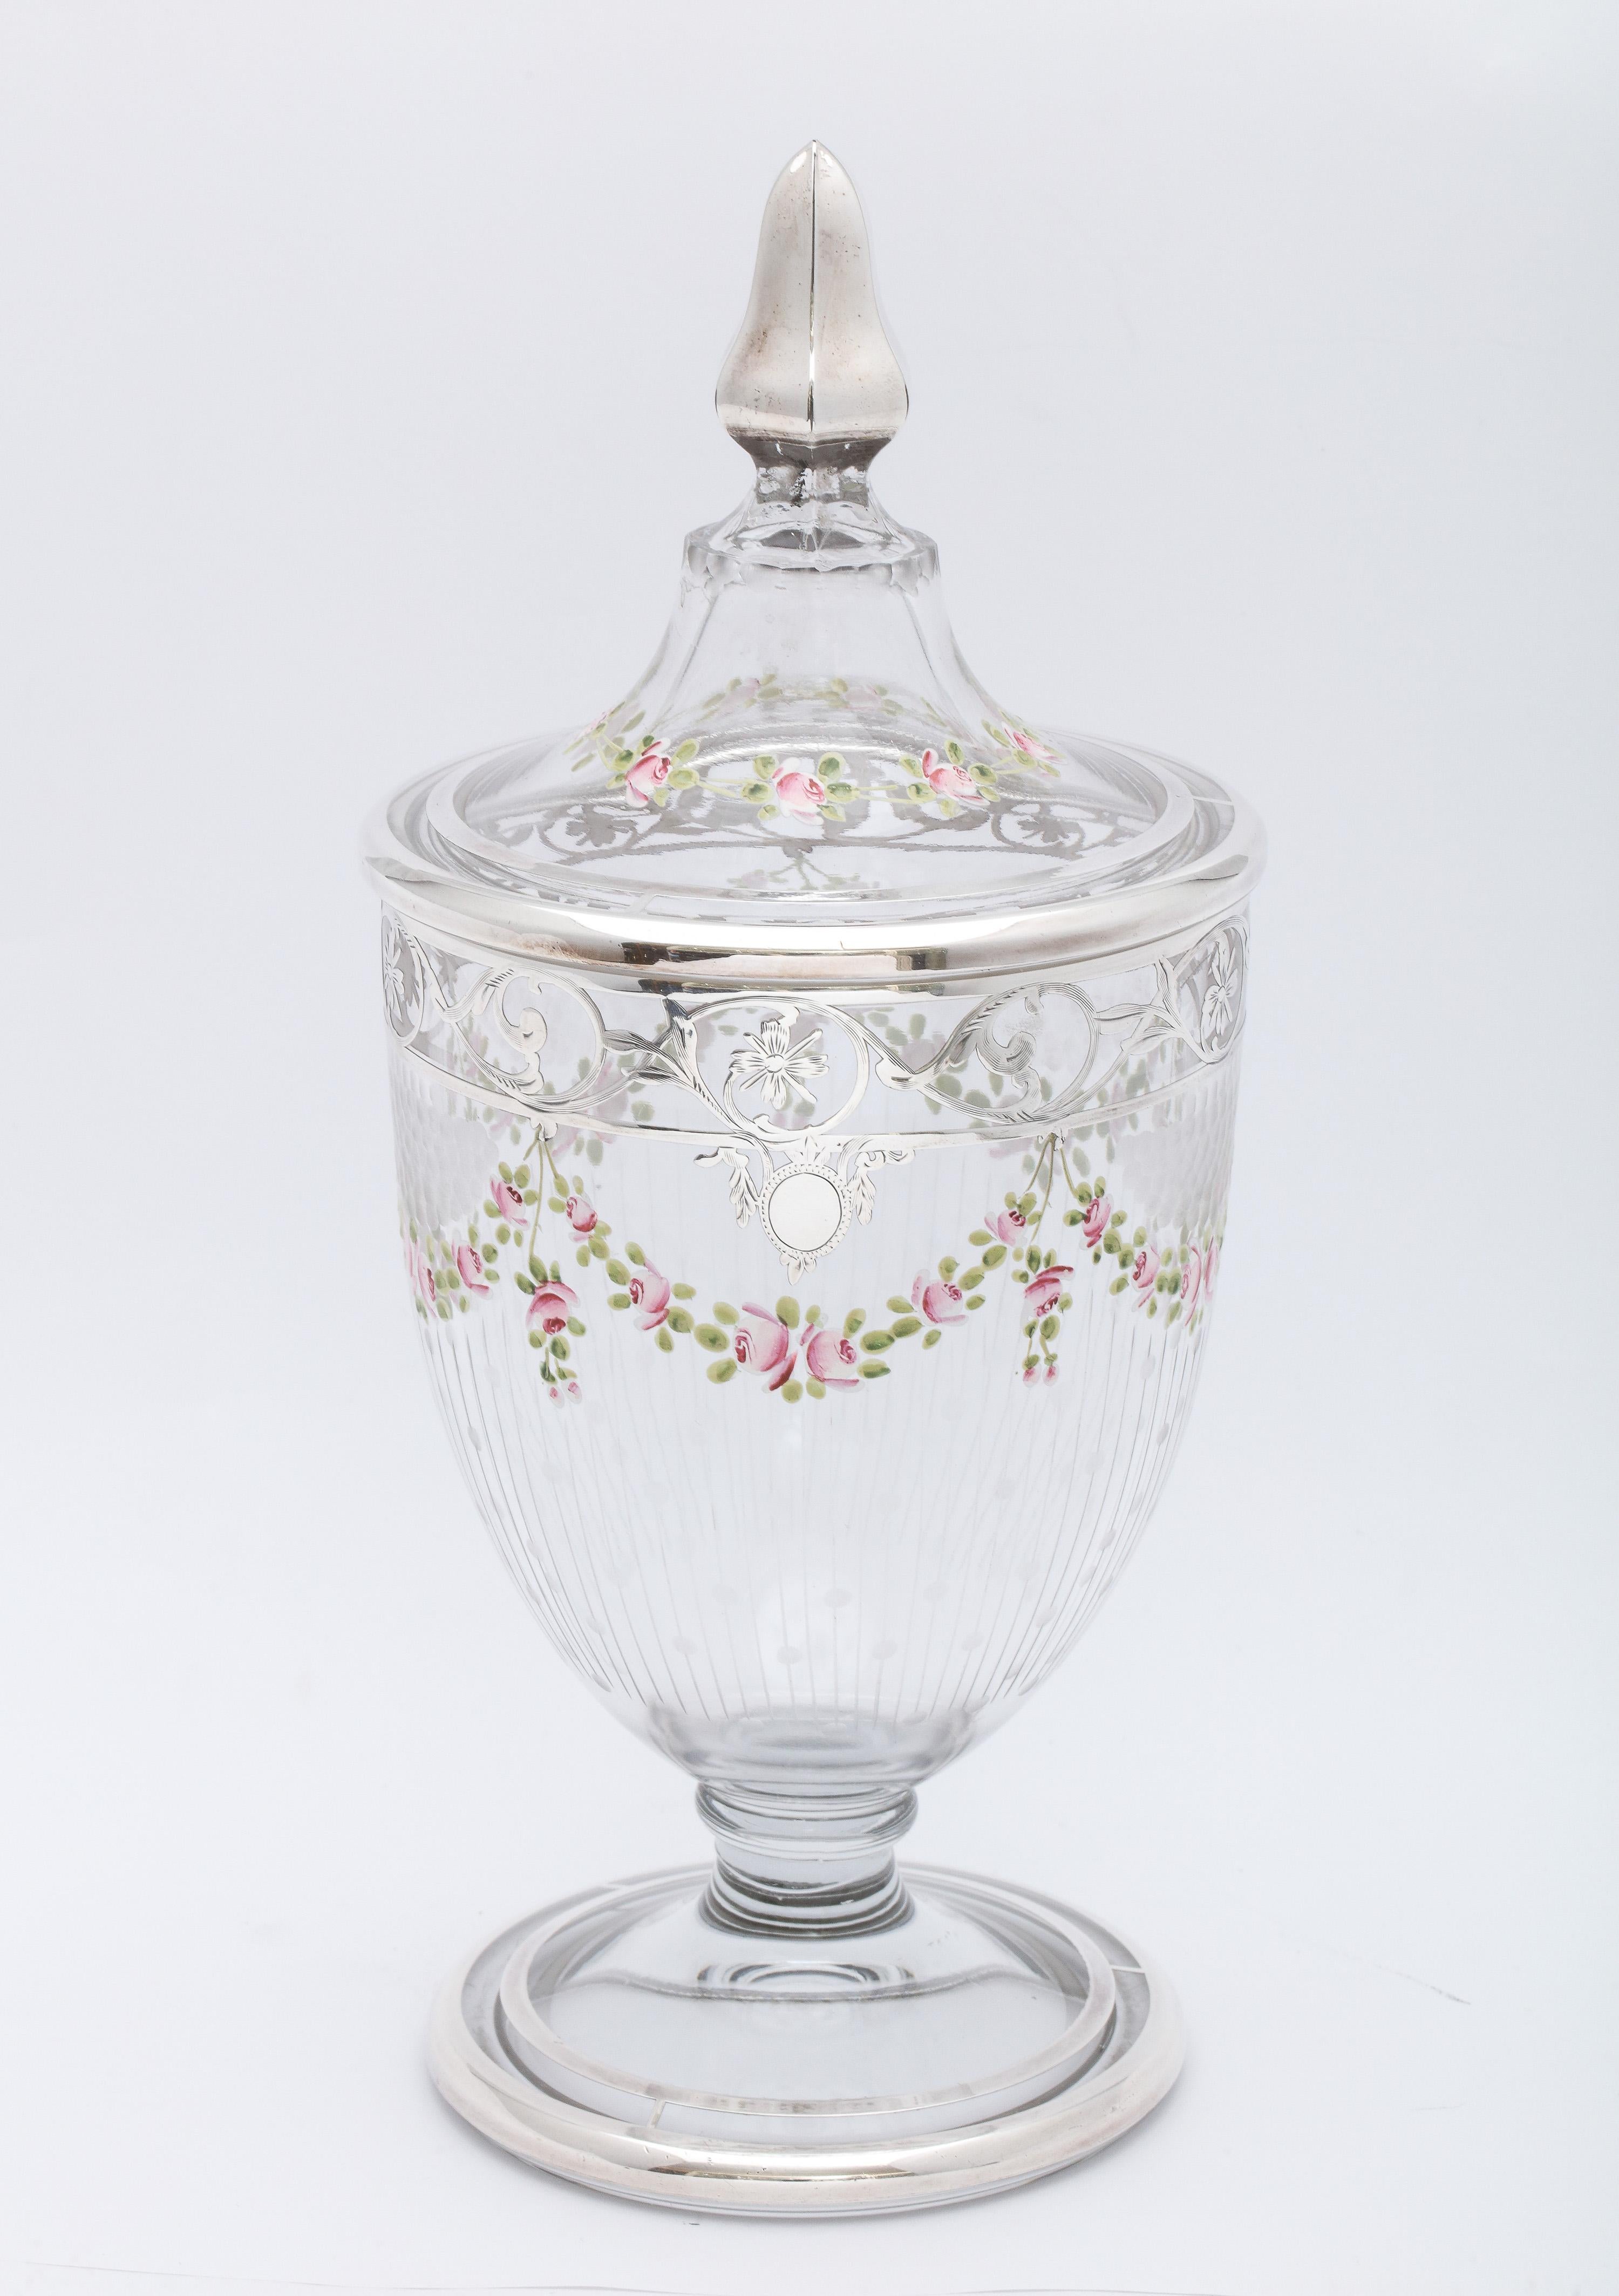 Edwardian Period, sterling silver-overlay (with pink enameled rose garlands) glass sweetmeats jar, American, Ca 1910 (see photographs for arrow pointing to sterling silver mark). Enameled rose garlands and sterling silver decorate both the jar